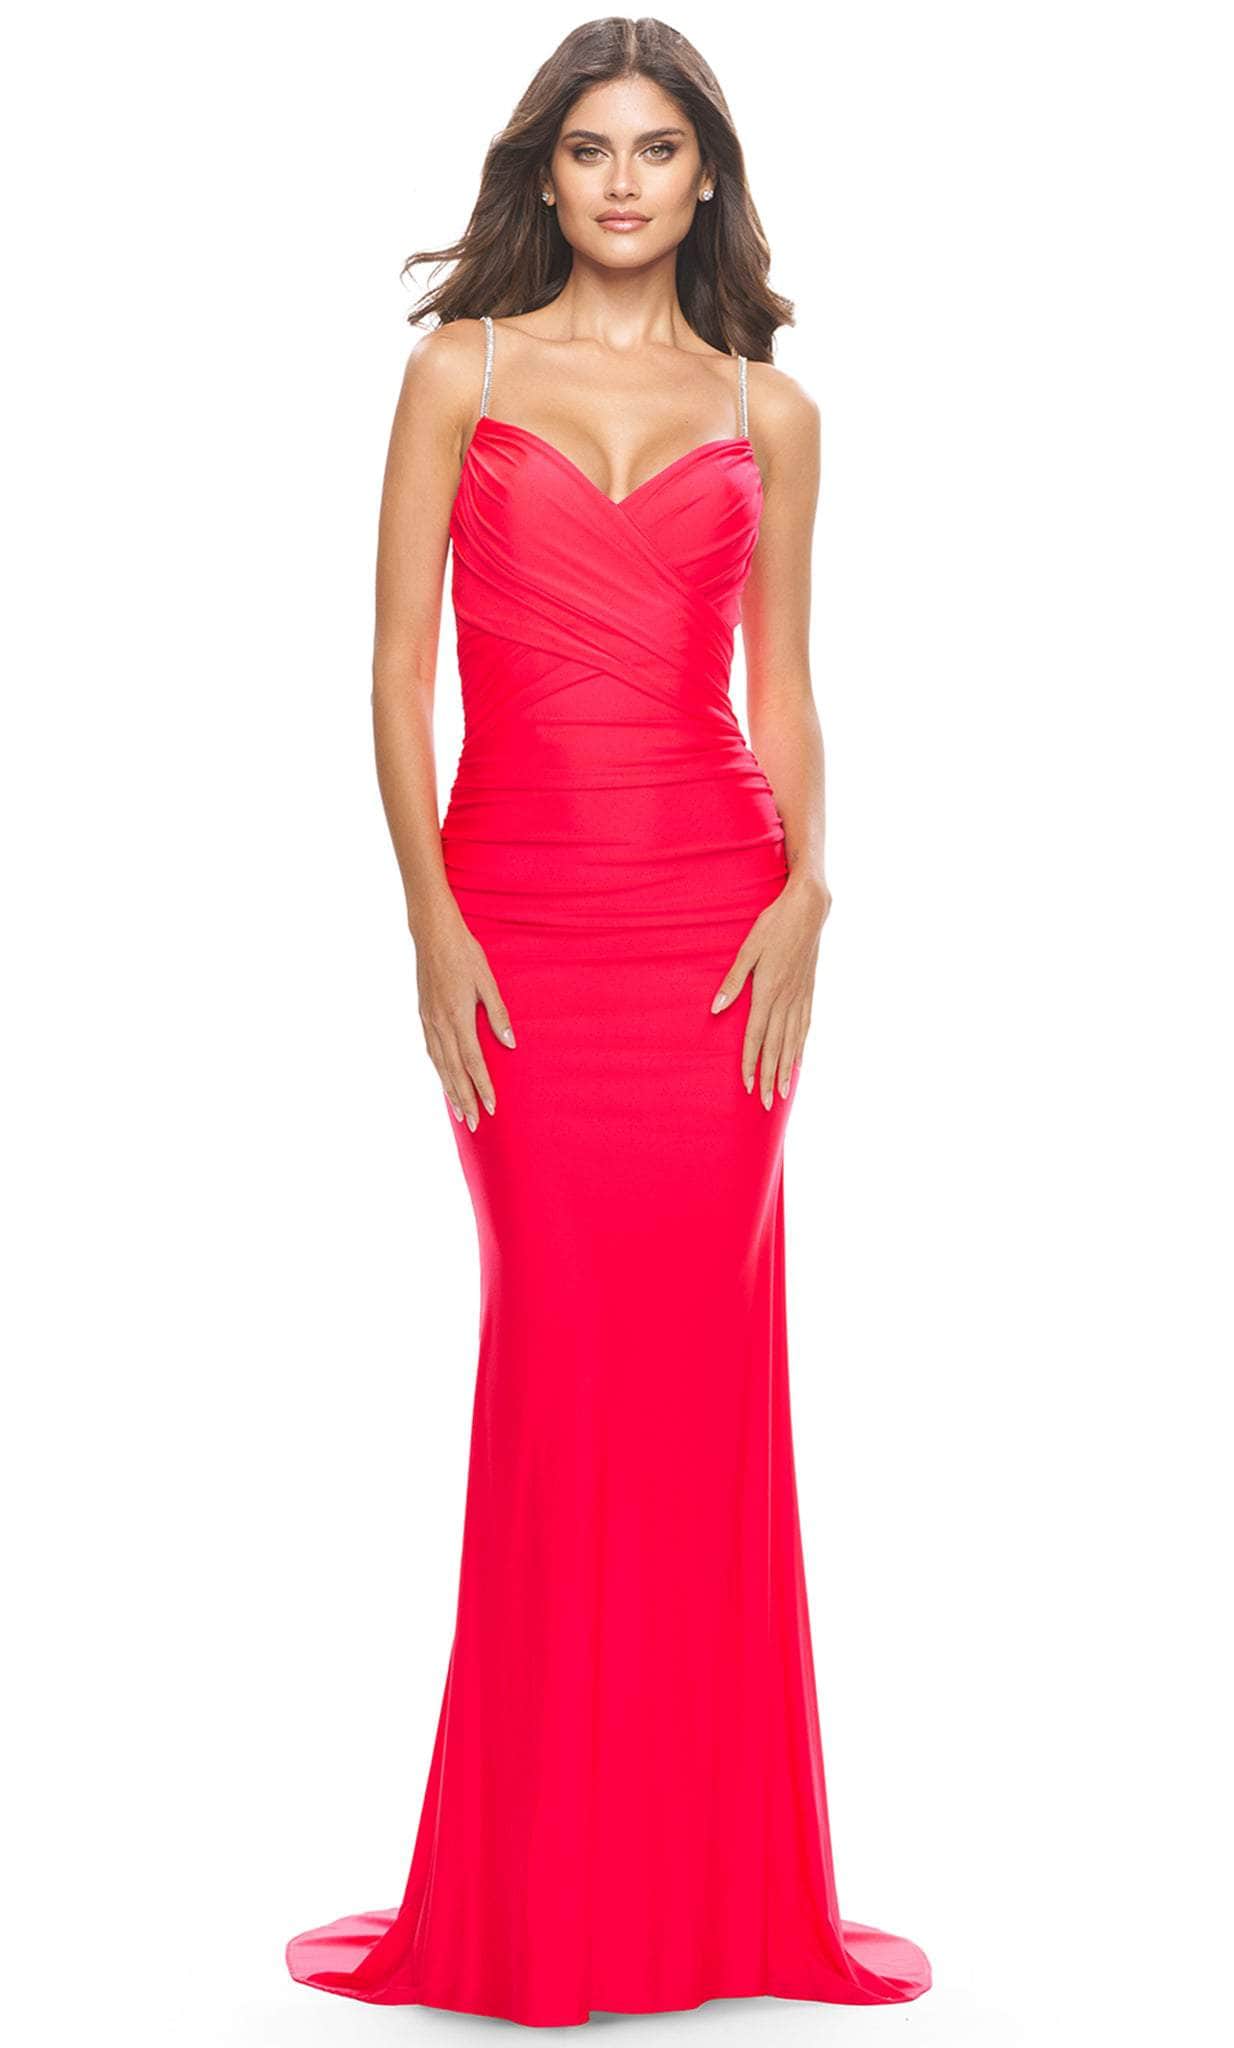 Image of La Femme 31222 - Jeweled Criss Cross Ruched Jersey Dress